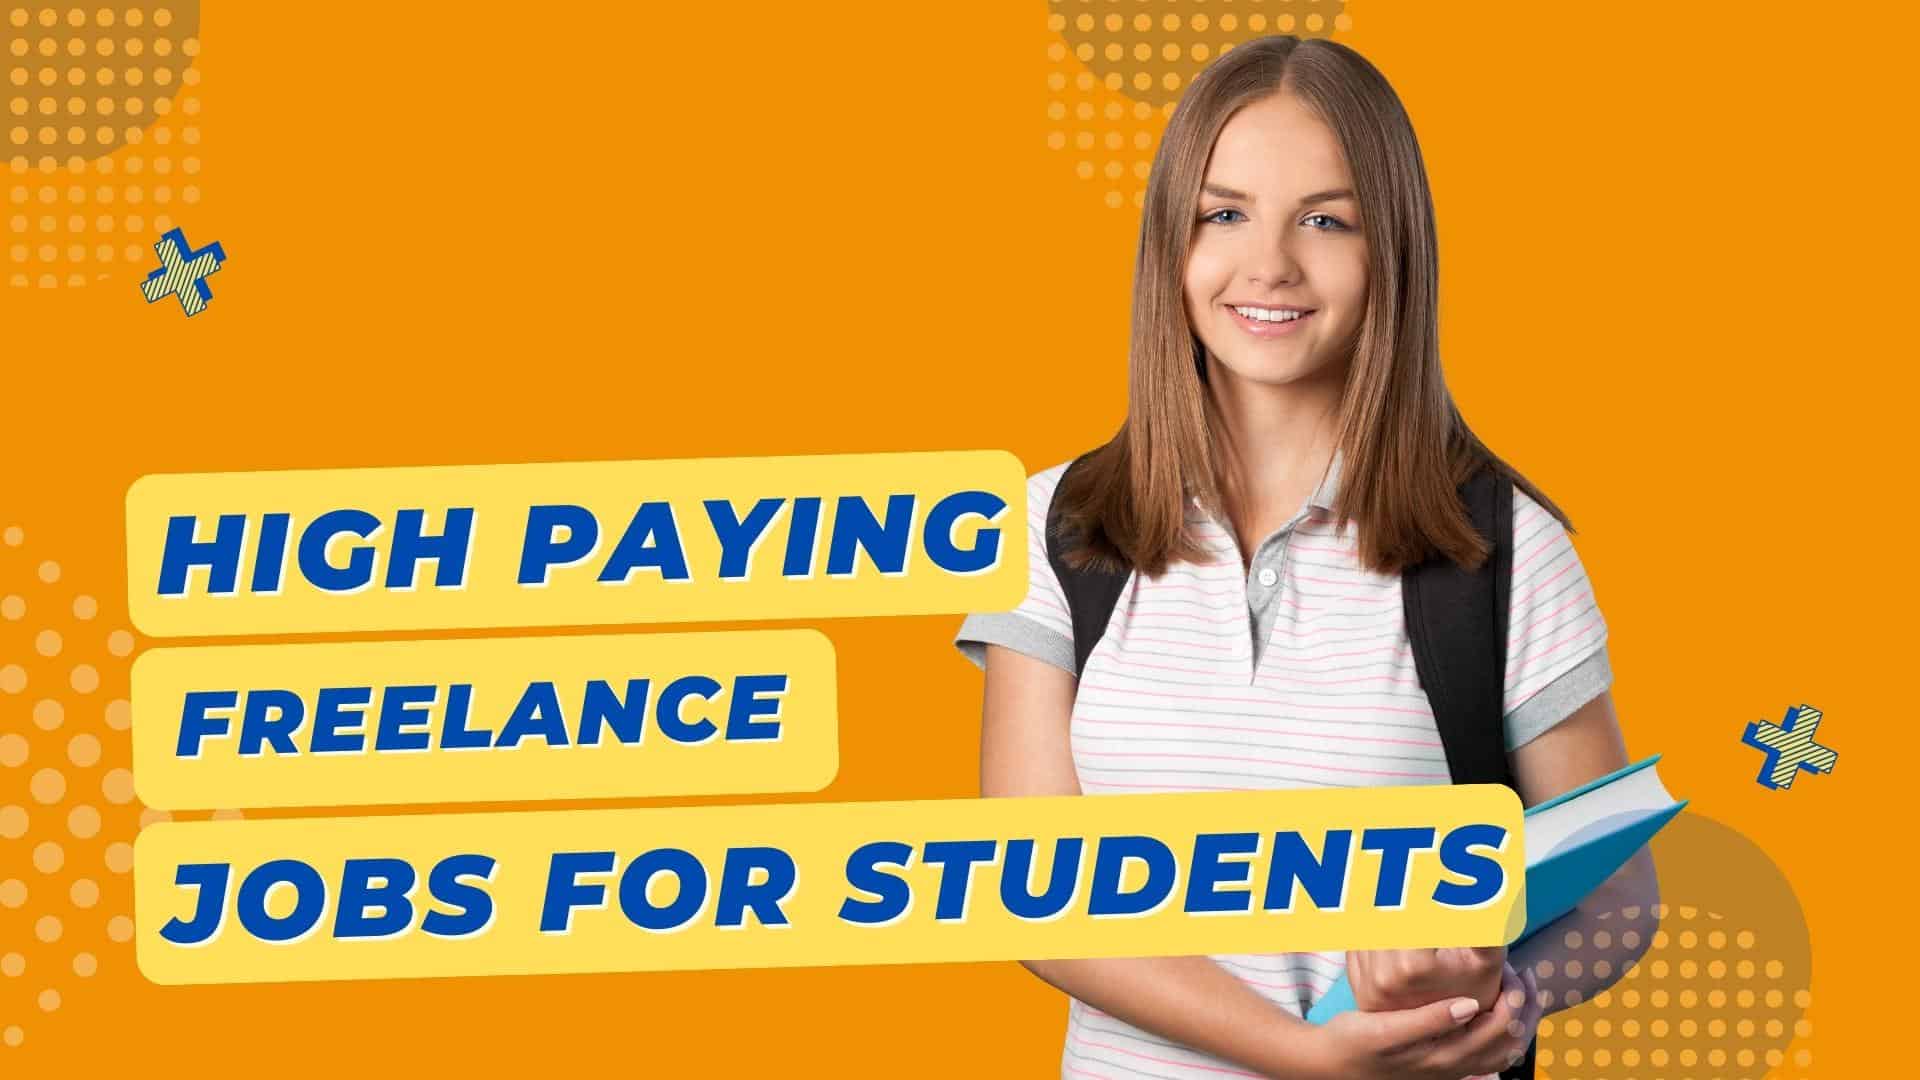 Freelance Jobs for Students: Your Key to Skill Building and Earning